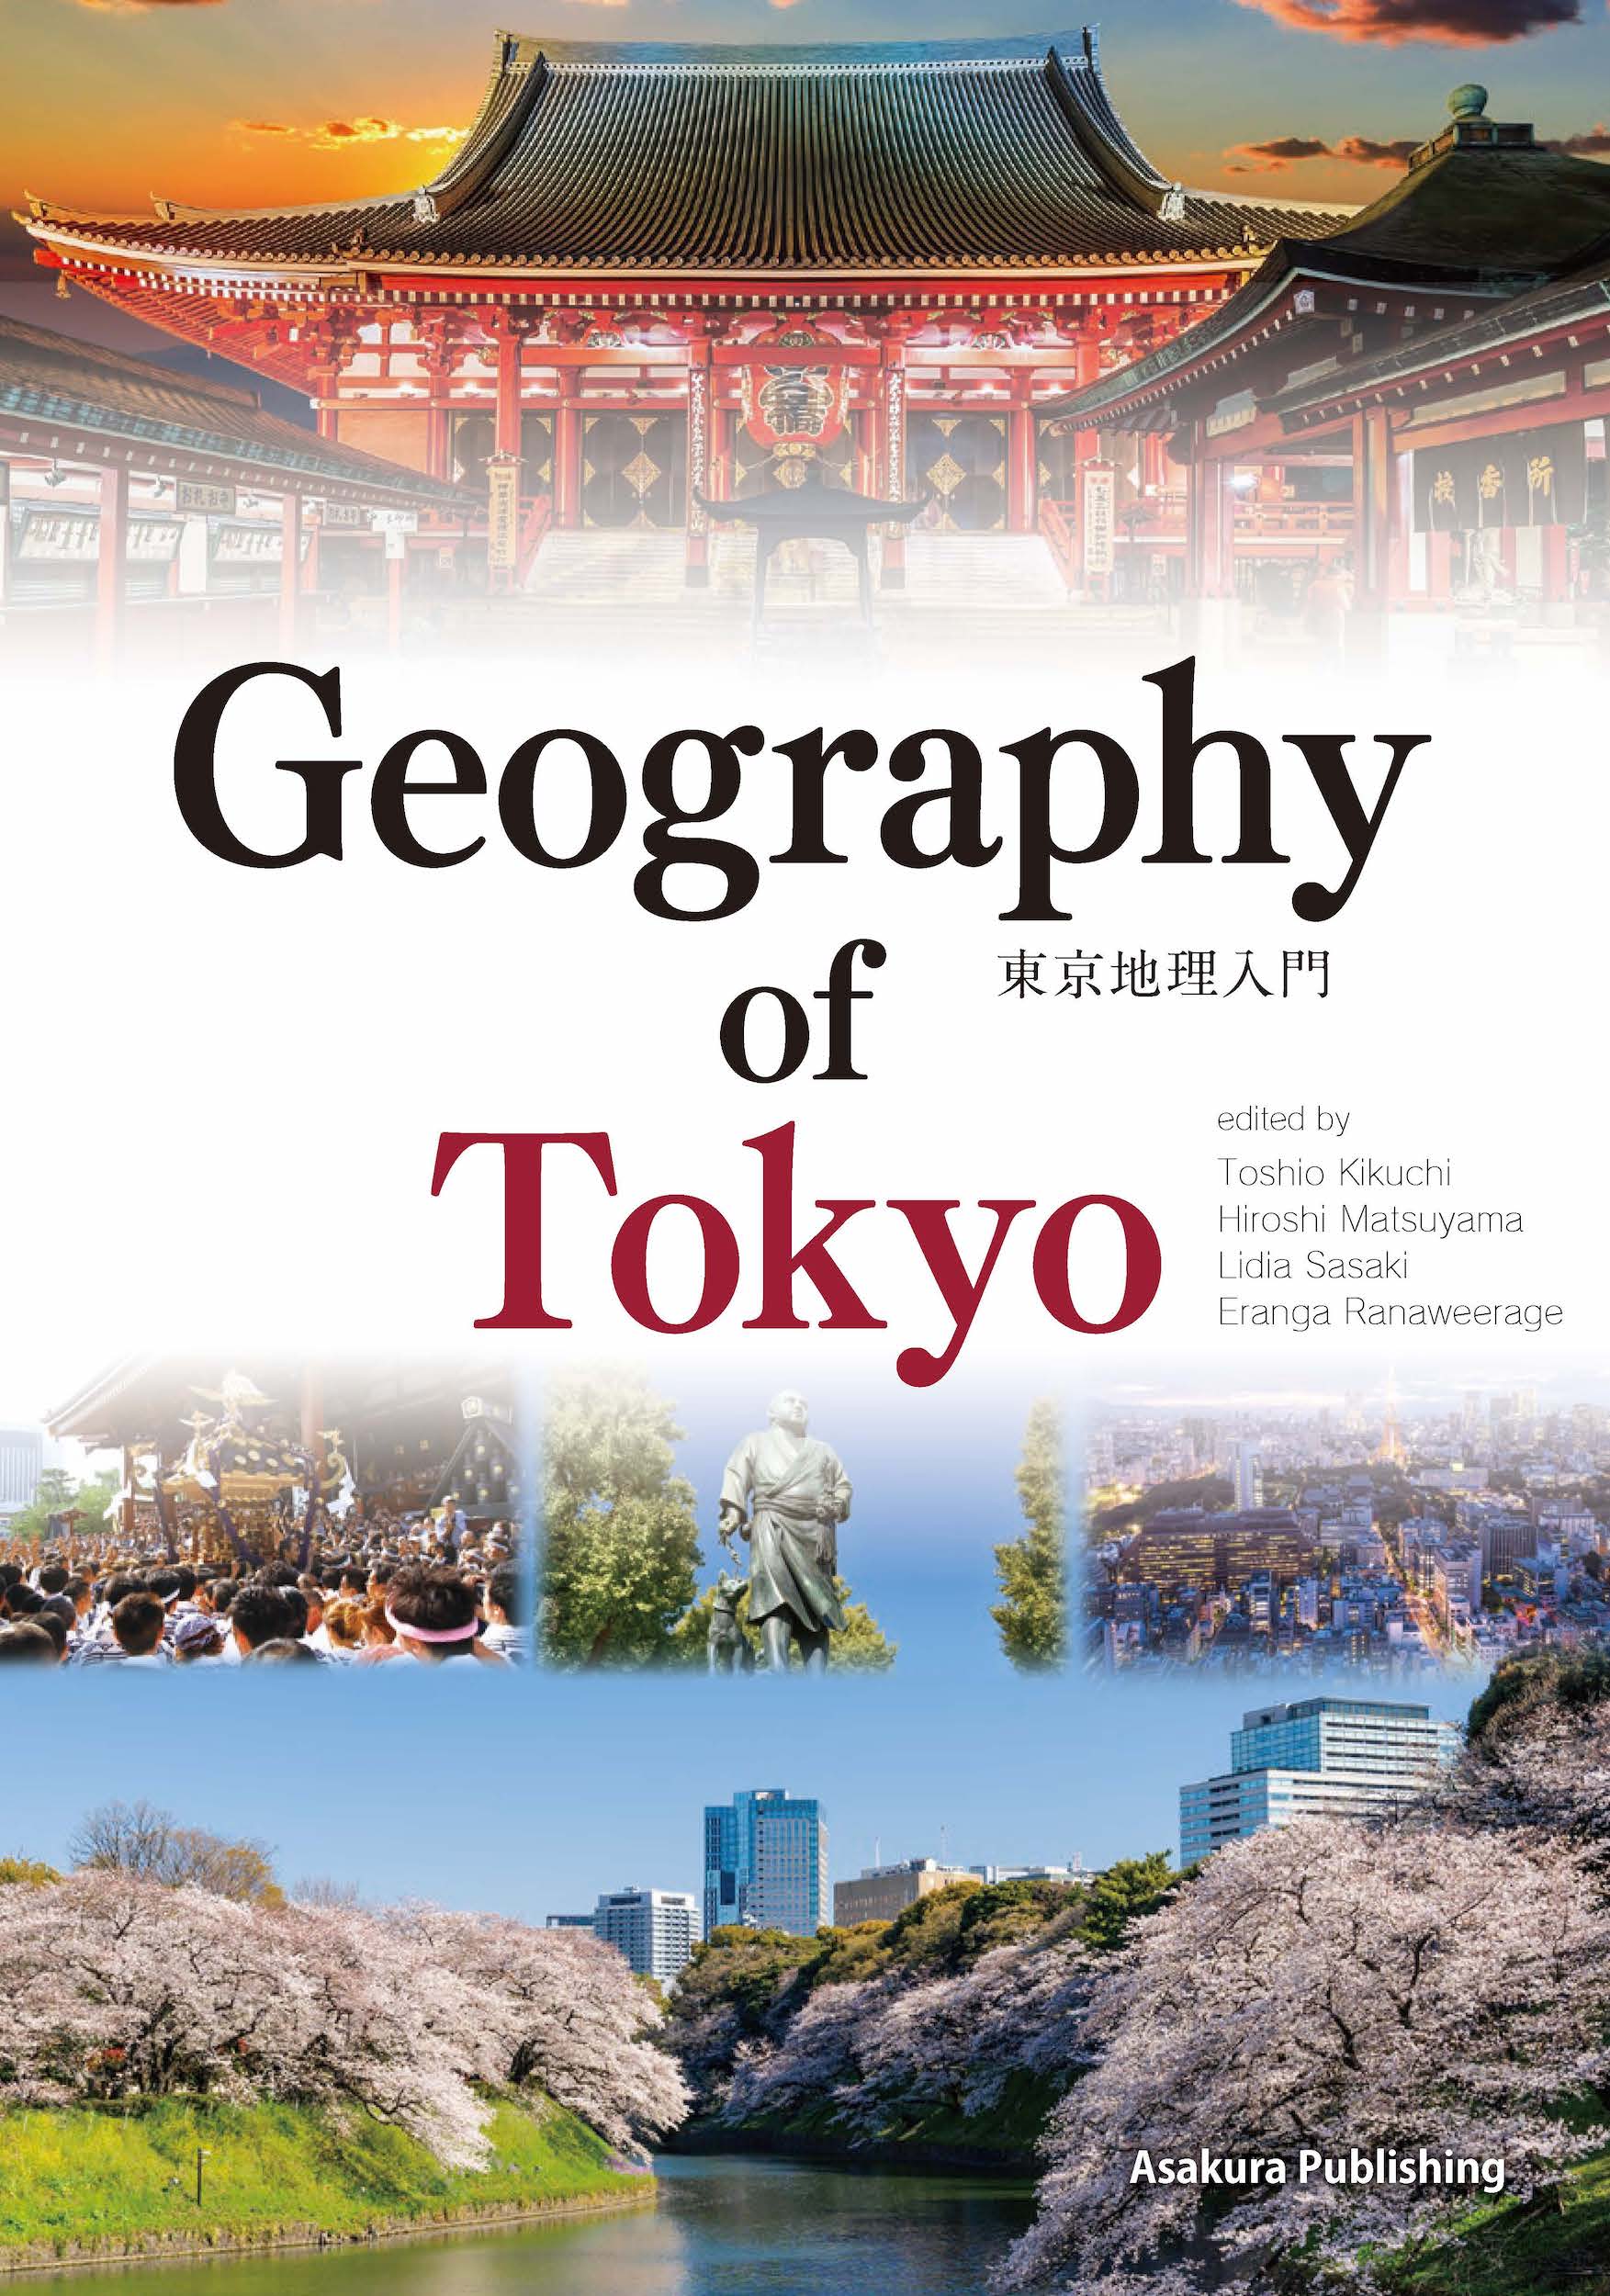 Geography of Tokyoの商品画像